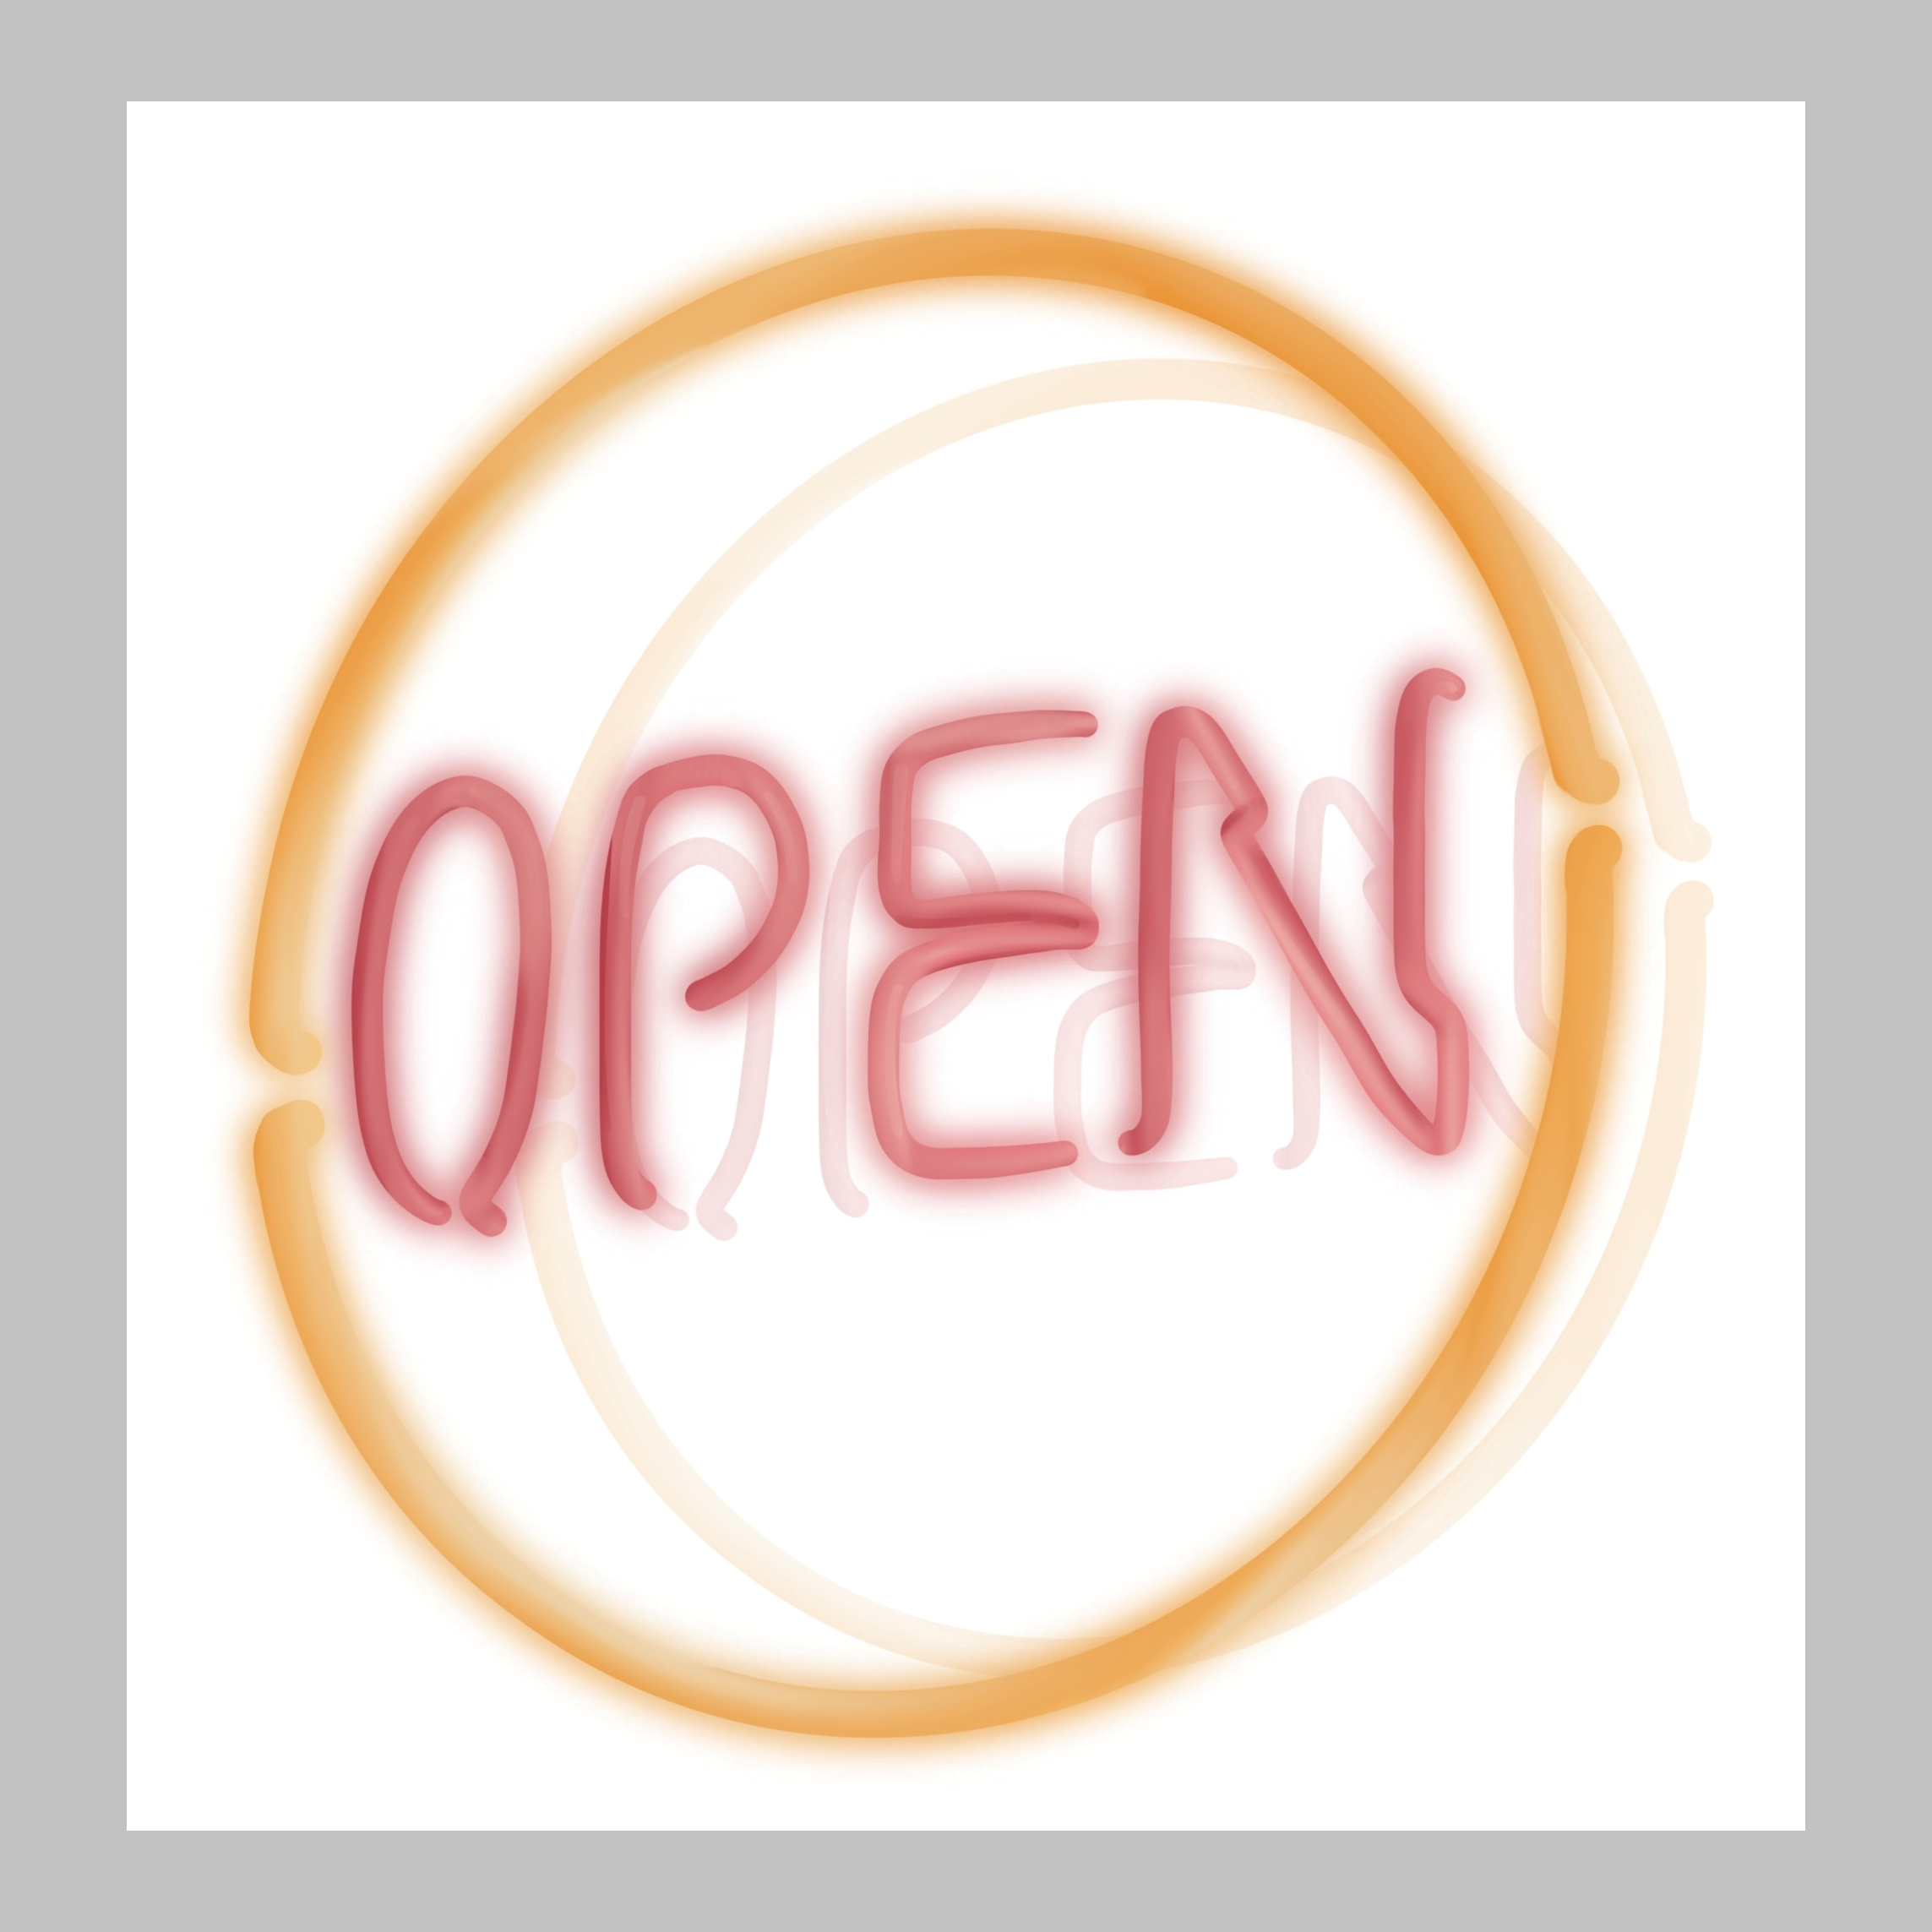 Title image for the blog post 'Five Ingredients for The 24/7 Lab' featuring the word 'Open' written on a picture.